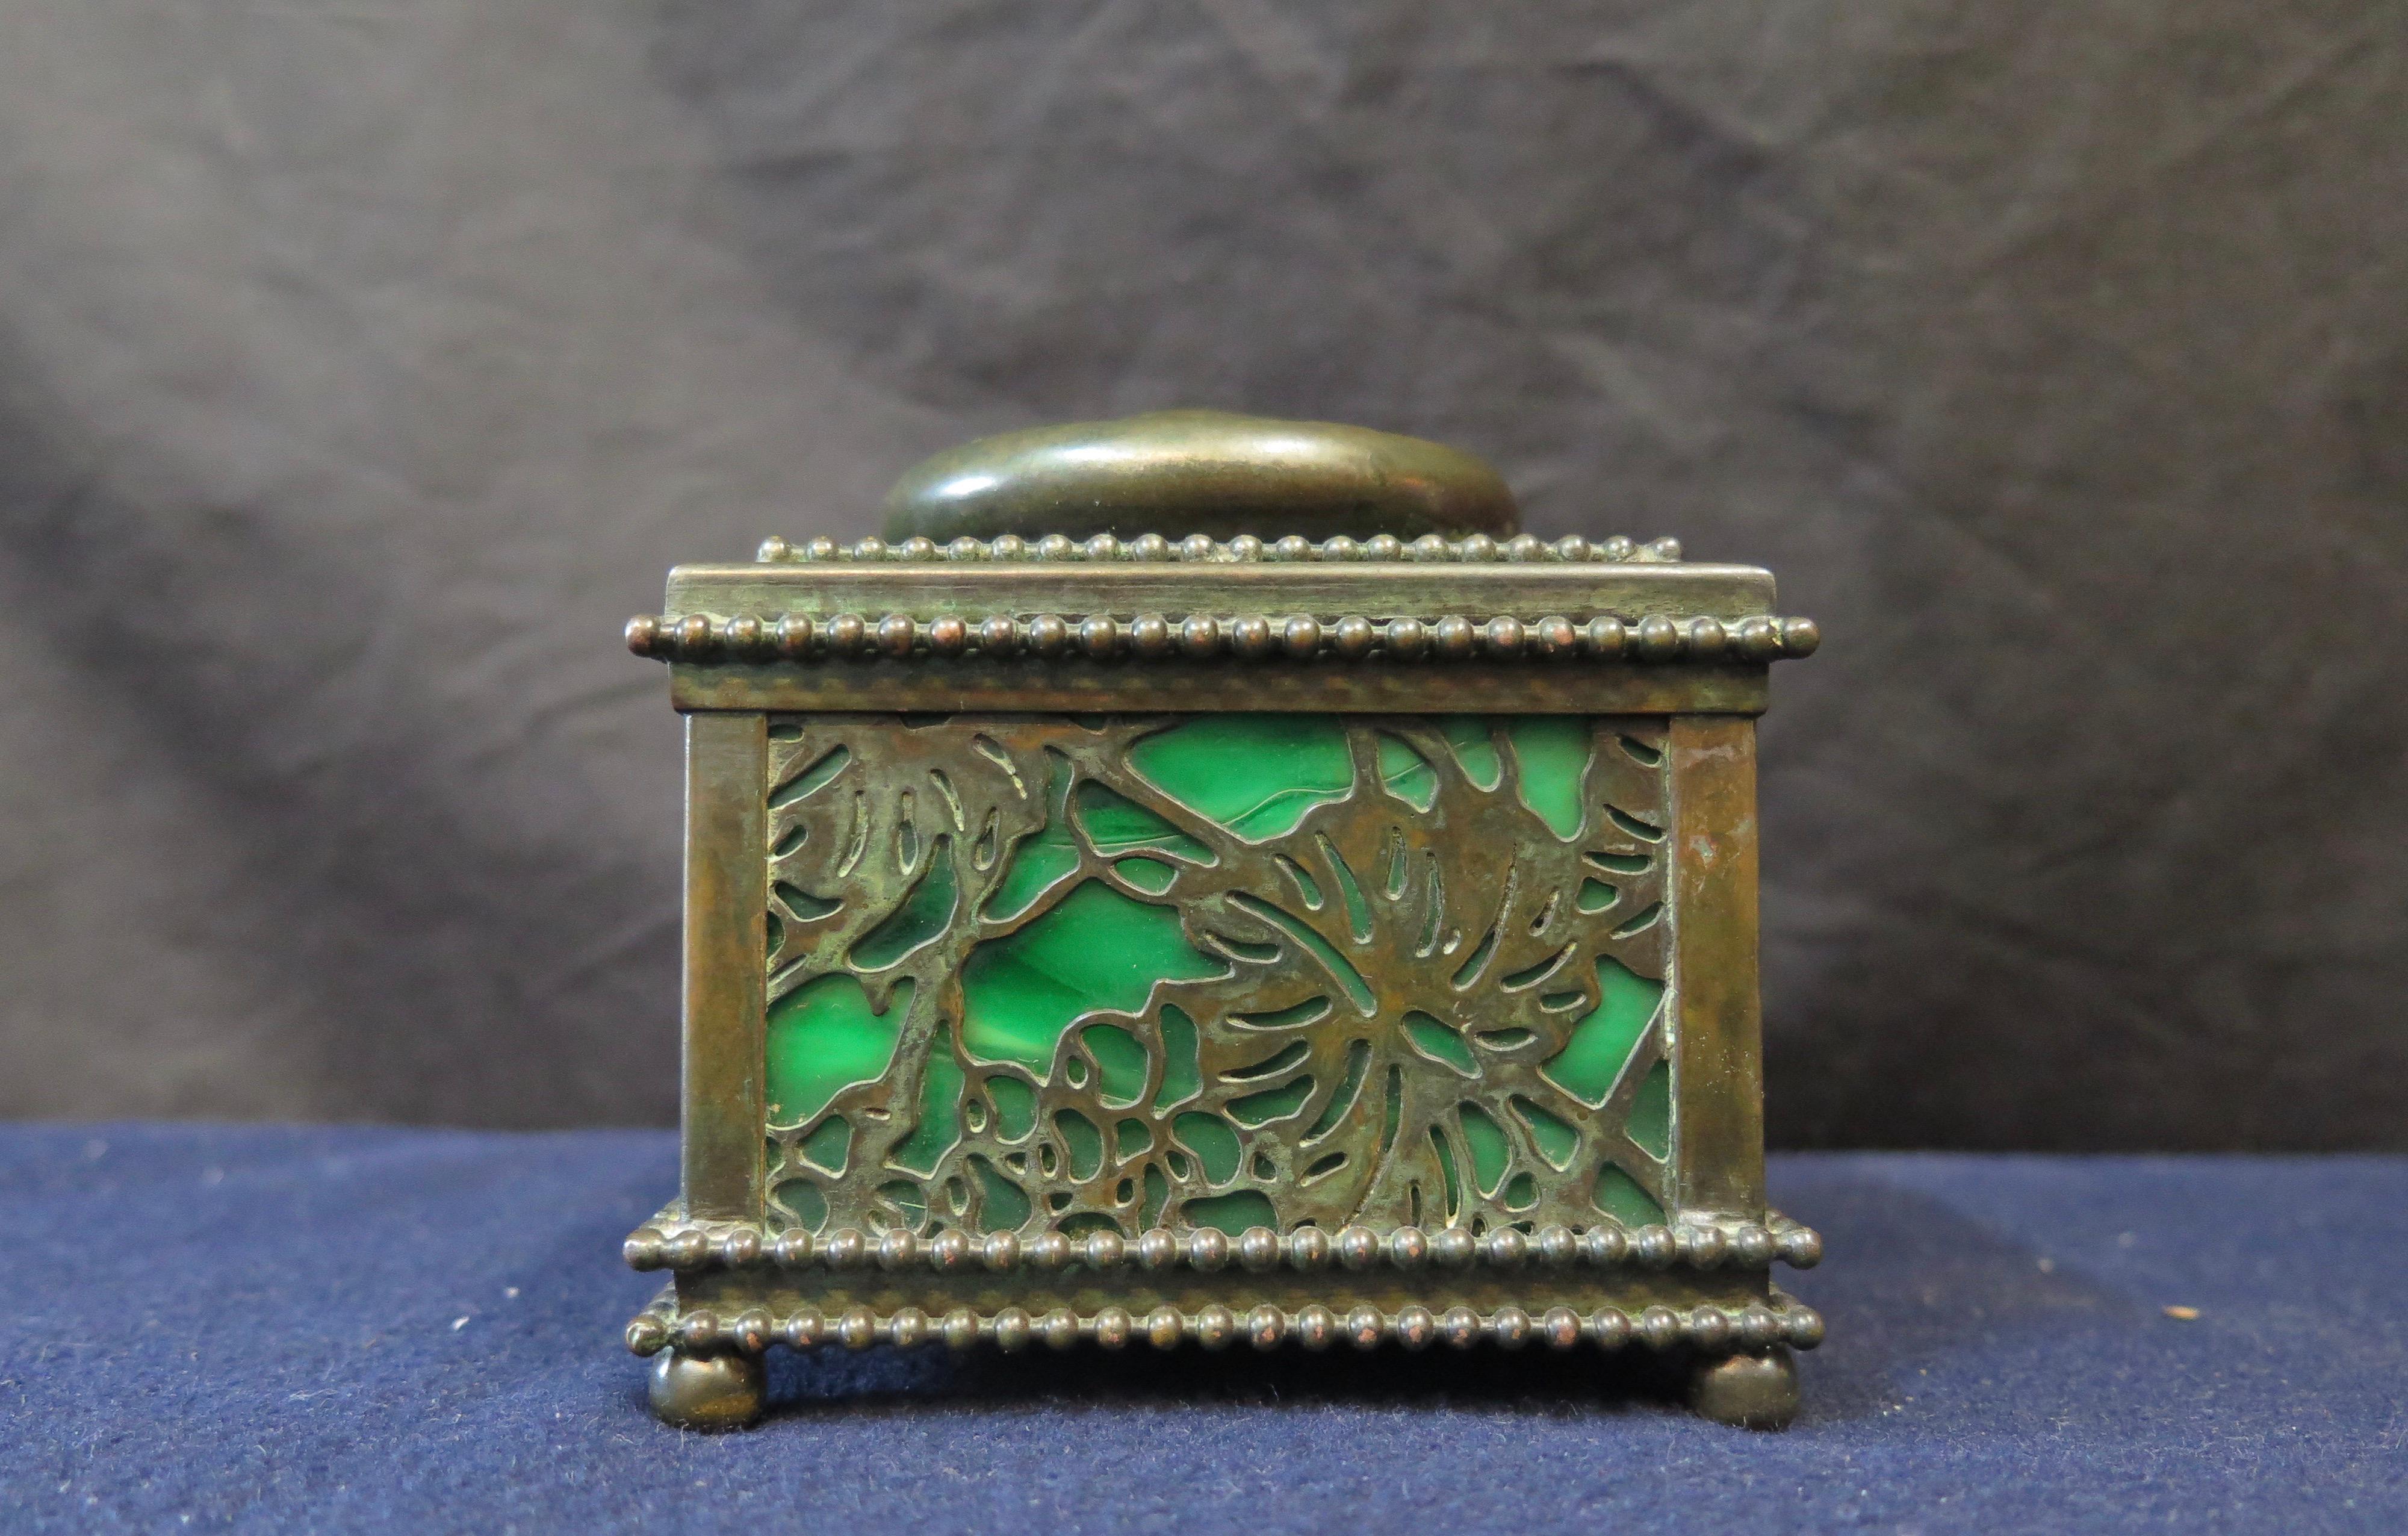 This vintage Tiffany Studios patinated brass & favrile art glass inkwell is beautifully designed in the desirable “grapevine” pattern & dates from the early 1900’s. It retains its original green & white favrile glass covered by a grapevine brass